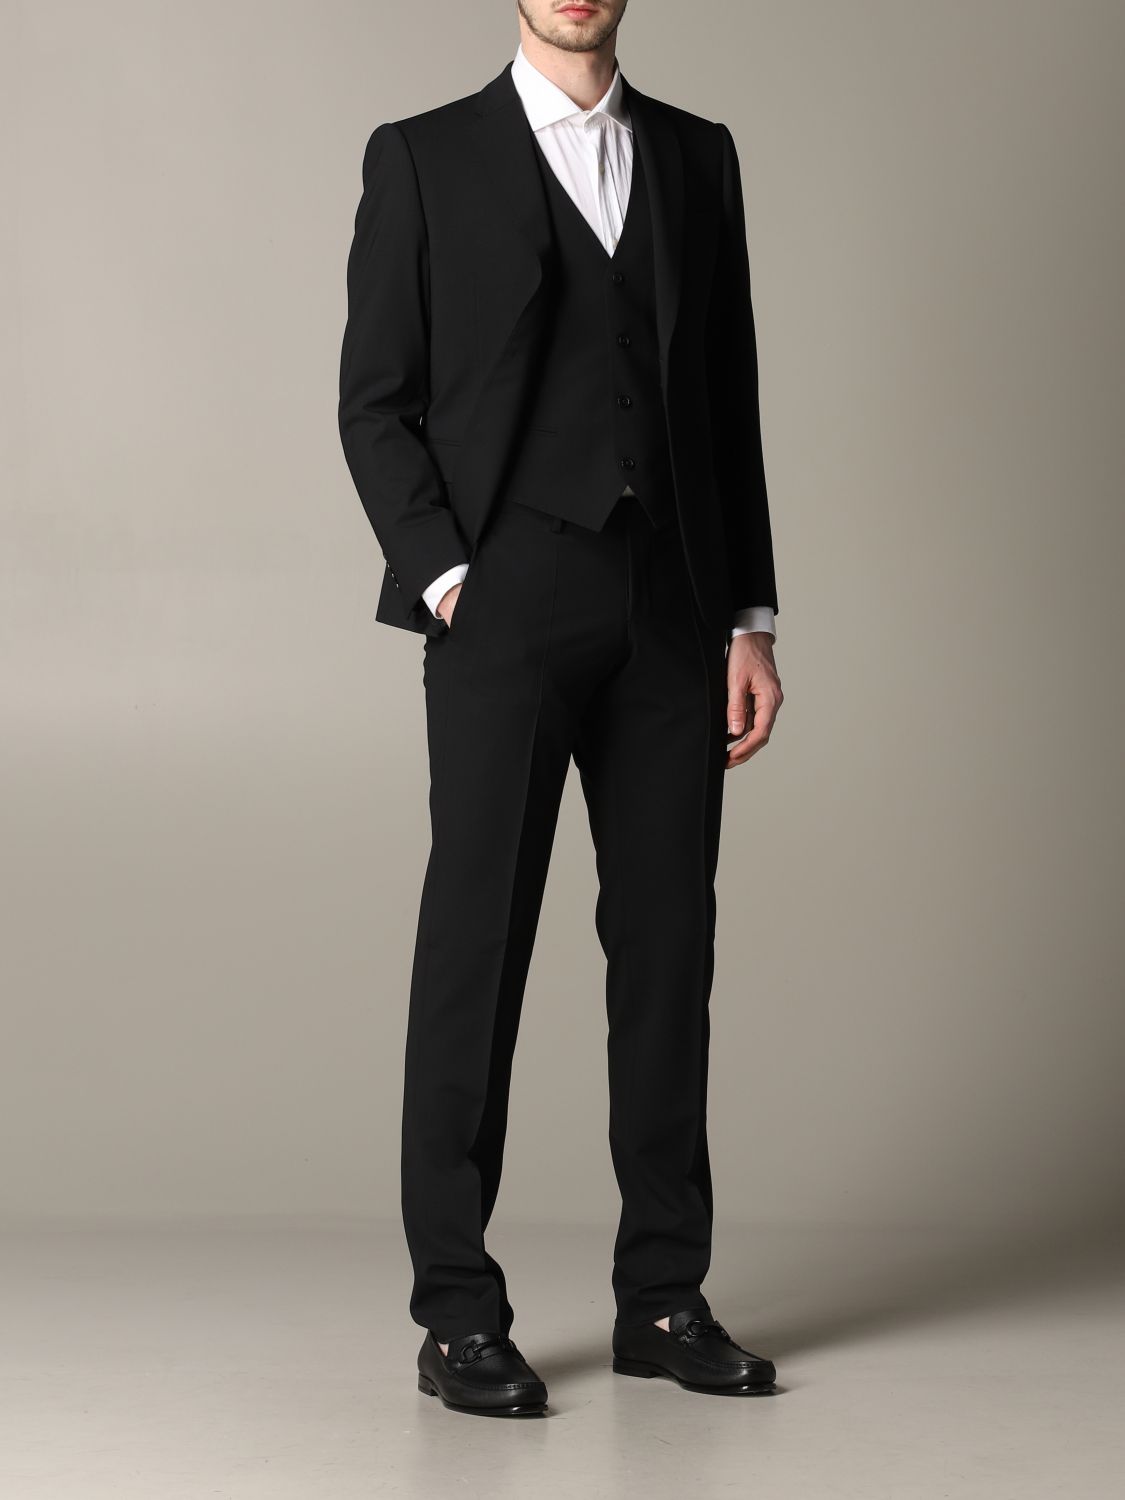 Emporio Armani Outlet: single-breasted suit with vest - Black | Suit ...